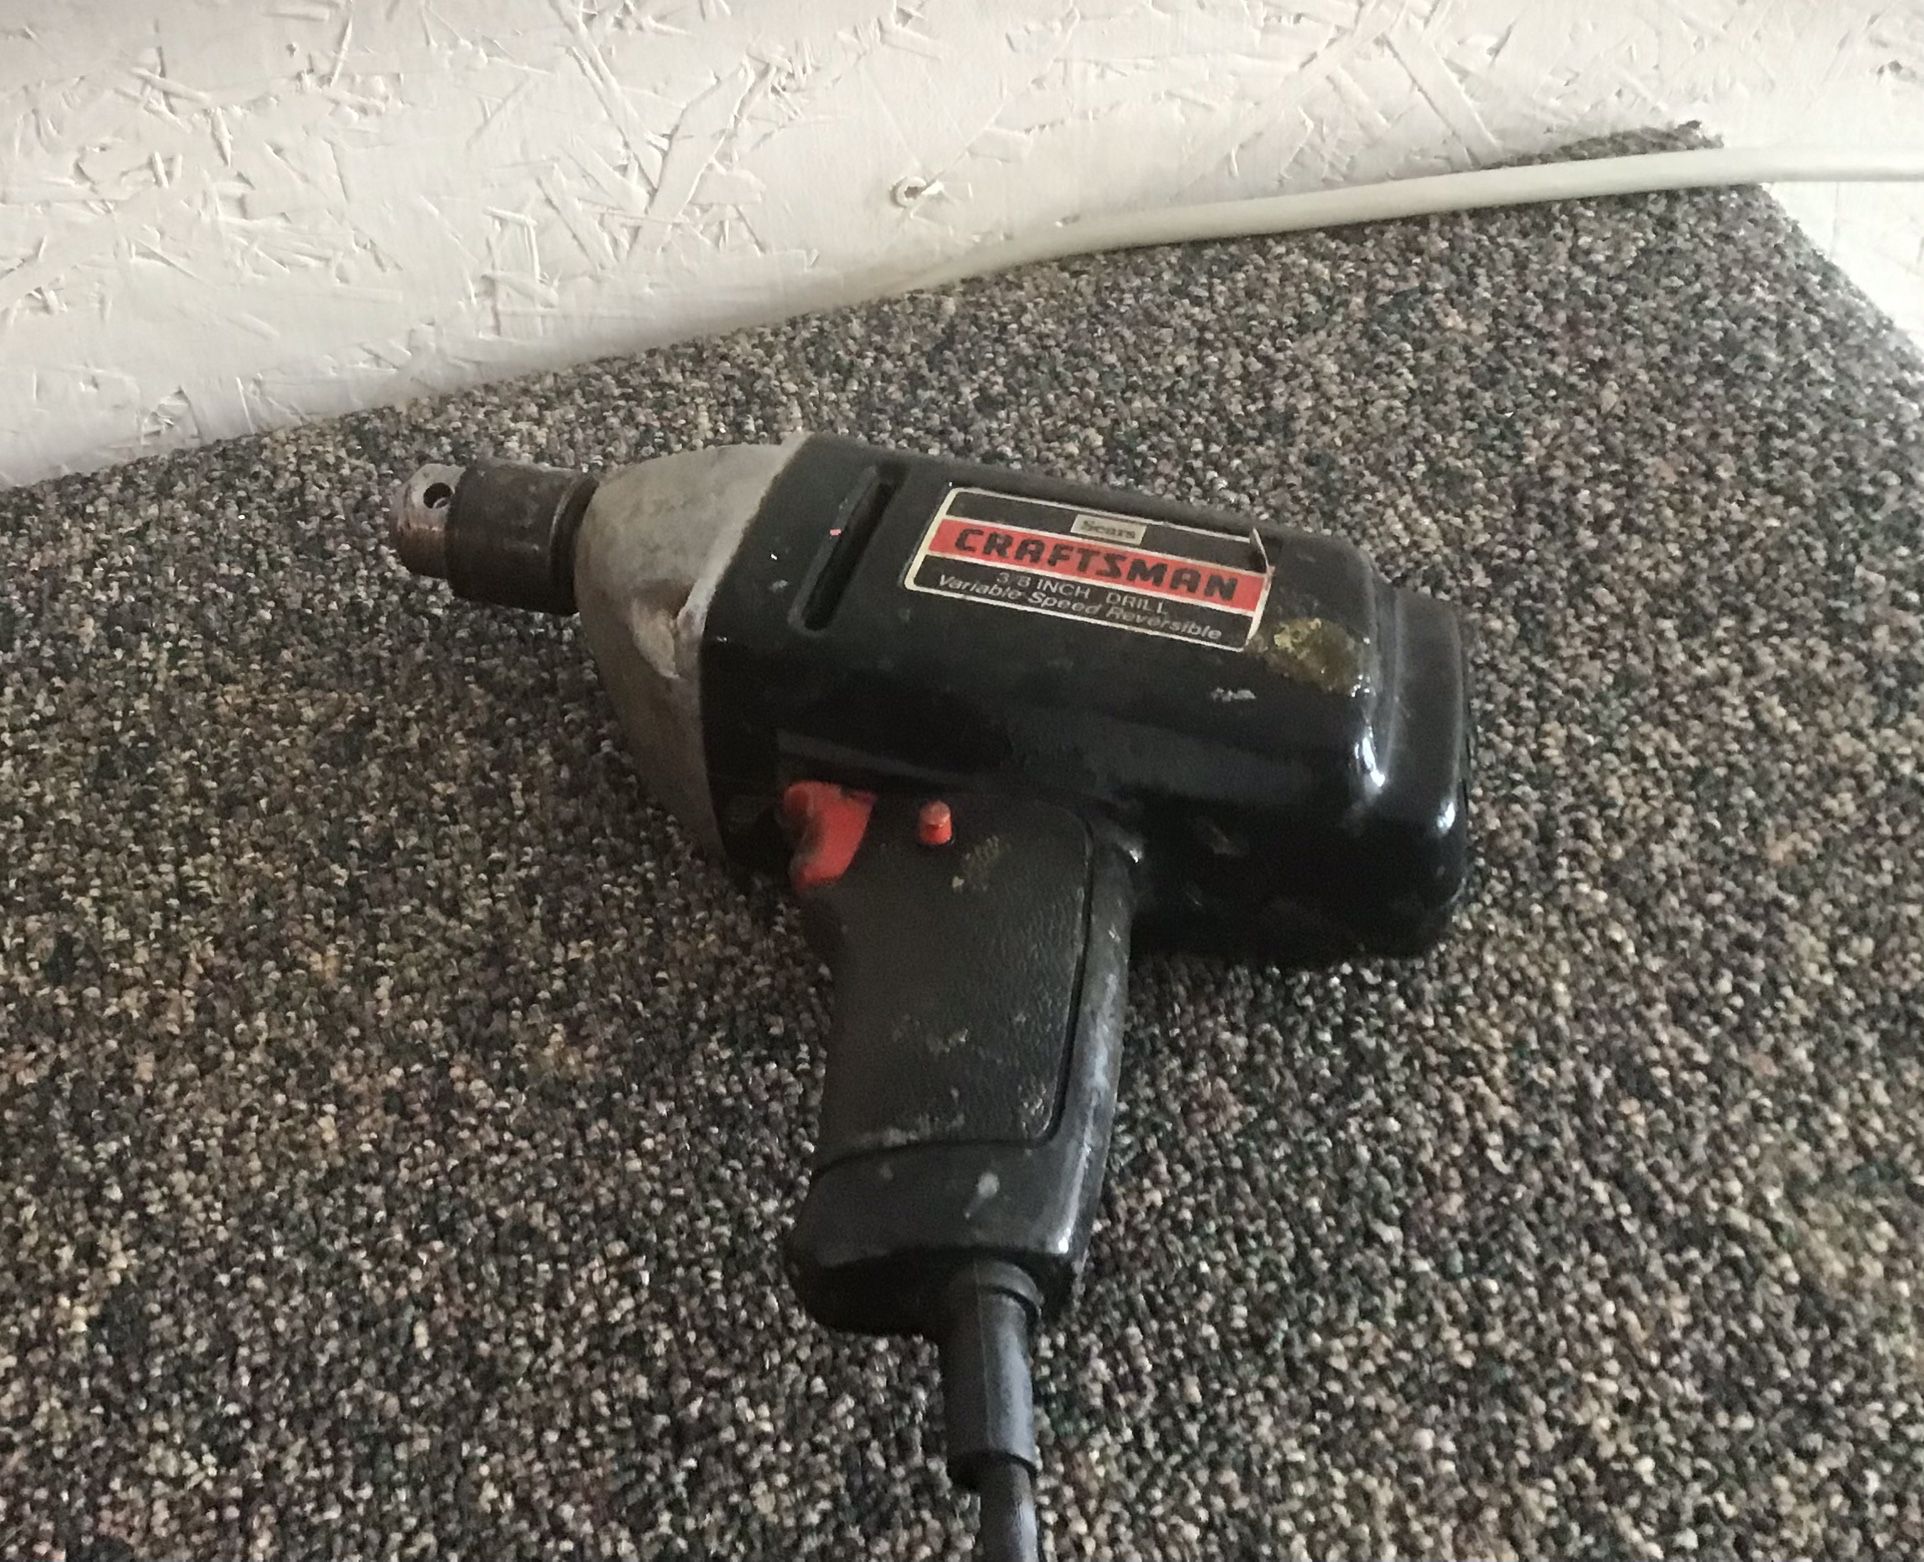 CRAFTSMAN 3/8” DRILL -with Chuck Key, works great! 